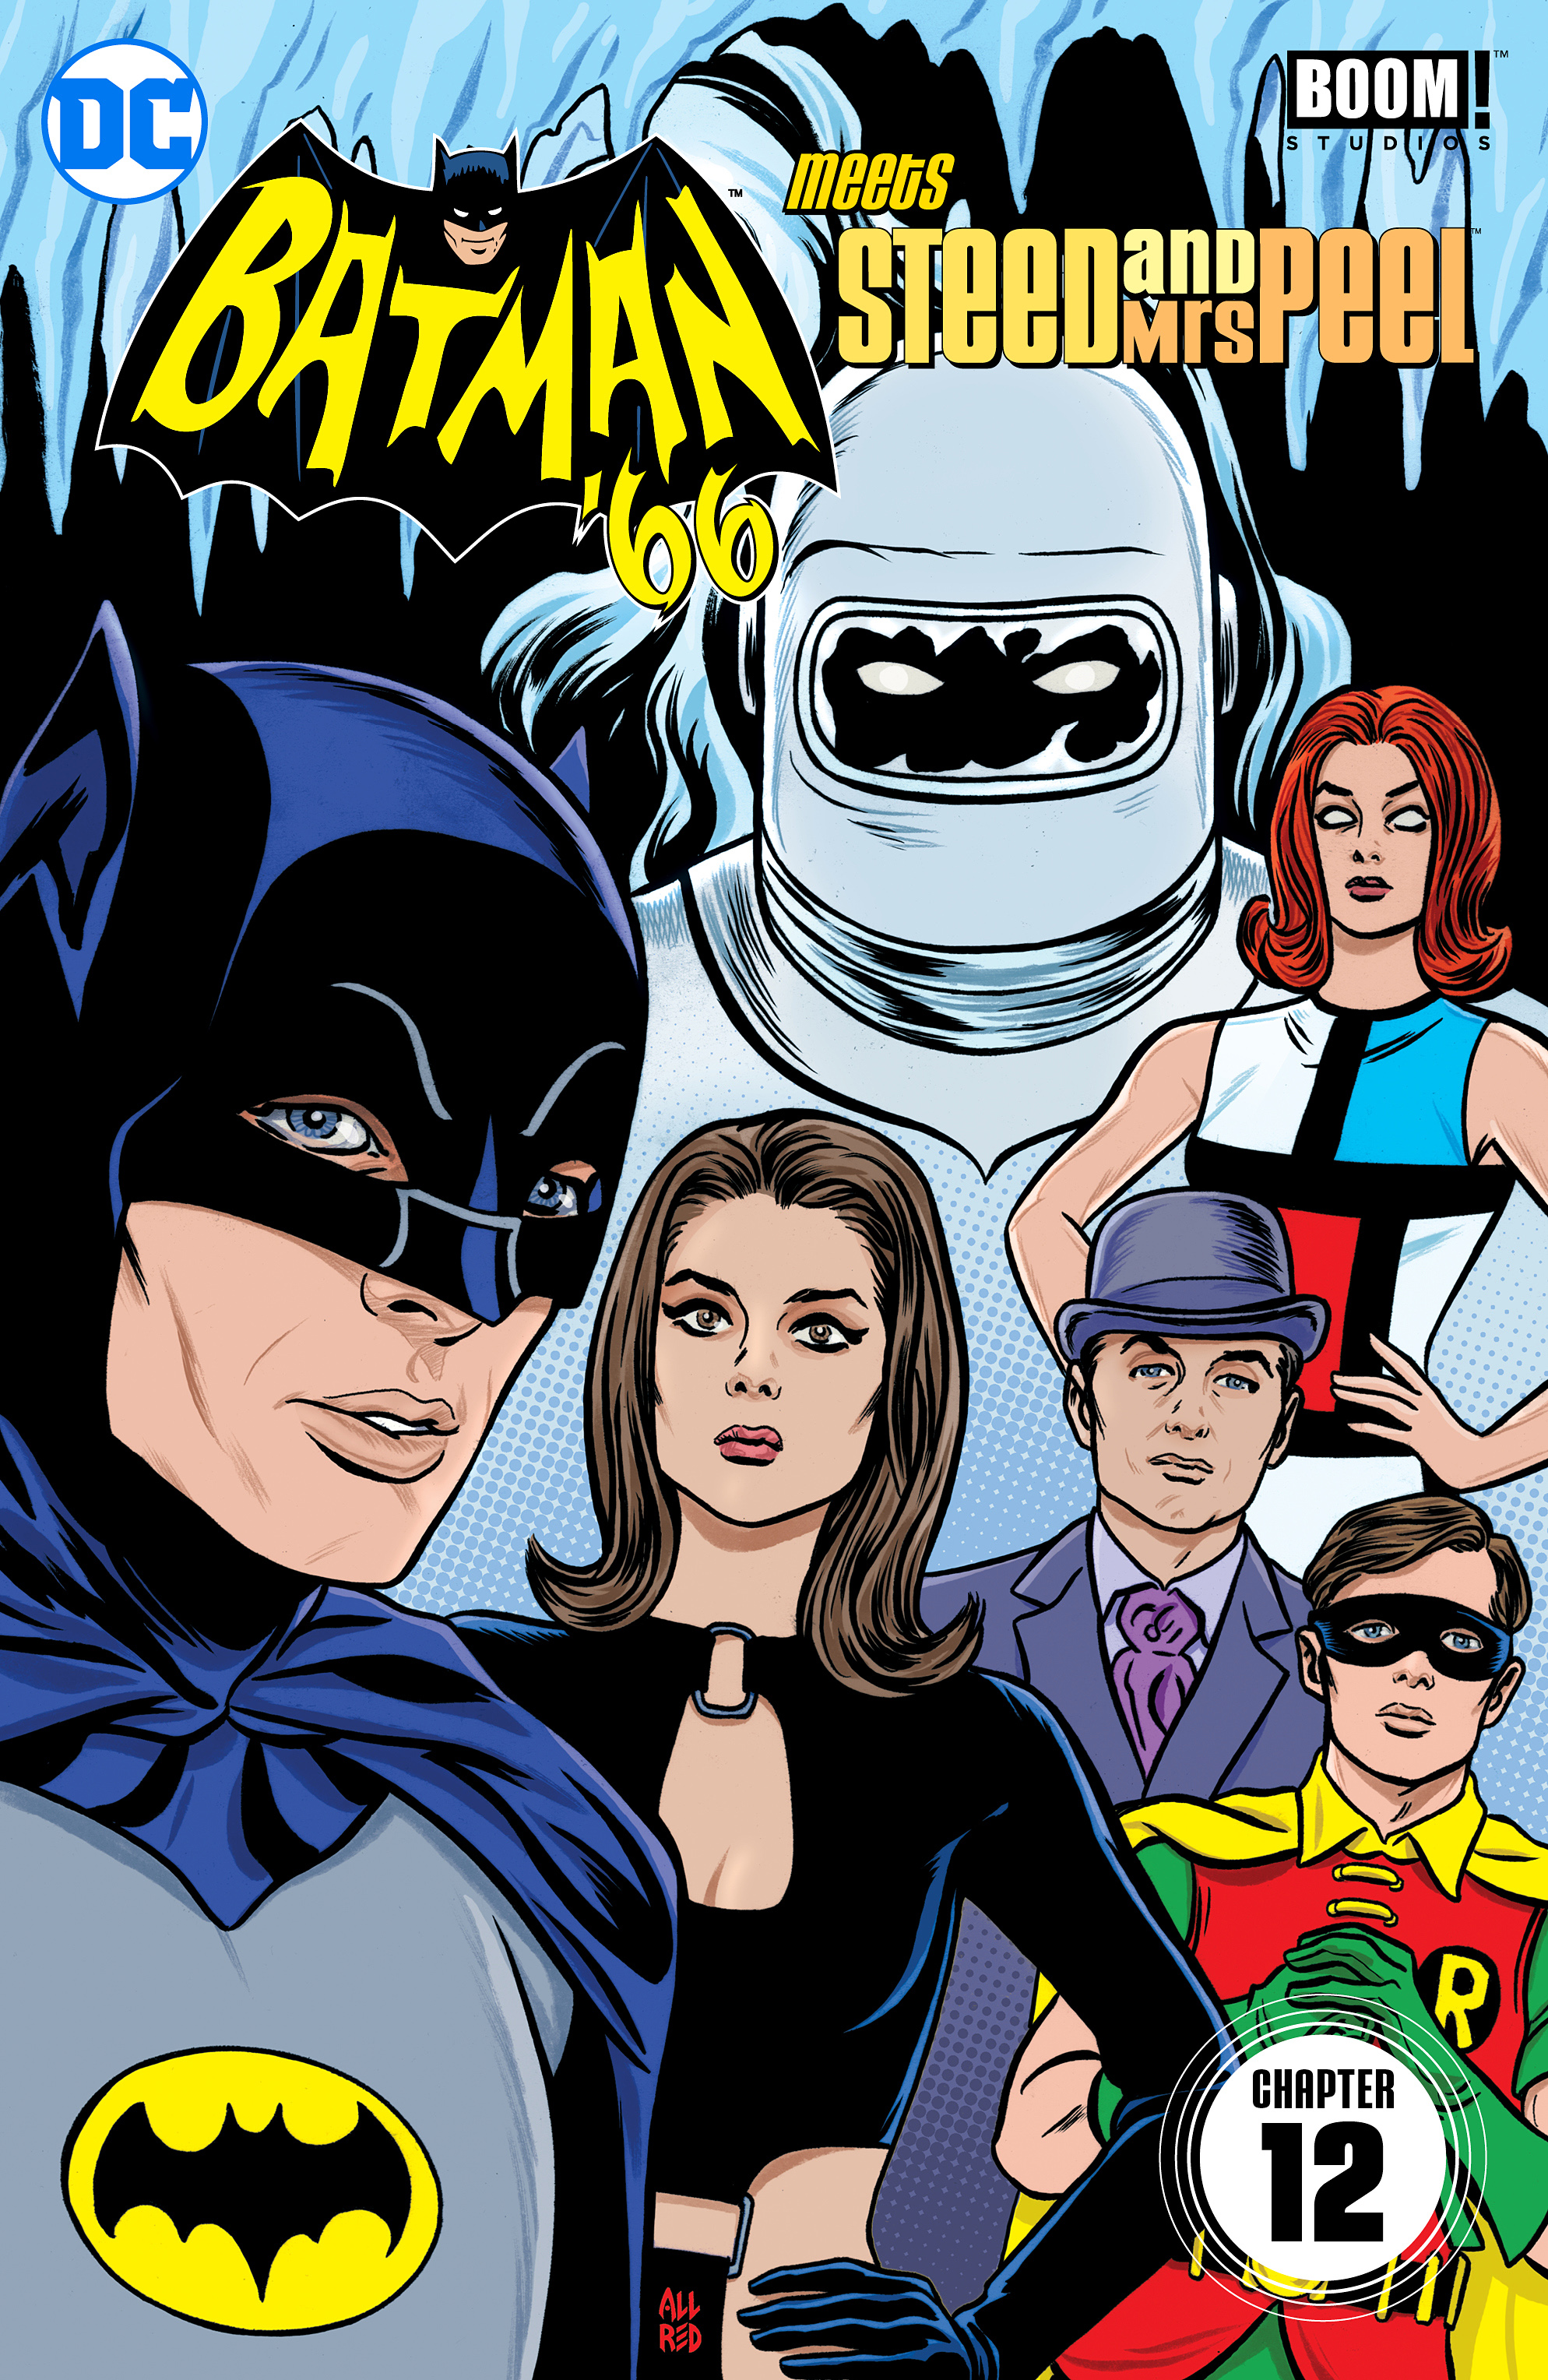 Batman '66 Meets Steed and Mrs Peel (2016): Chapter 12 - Page 2